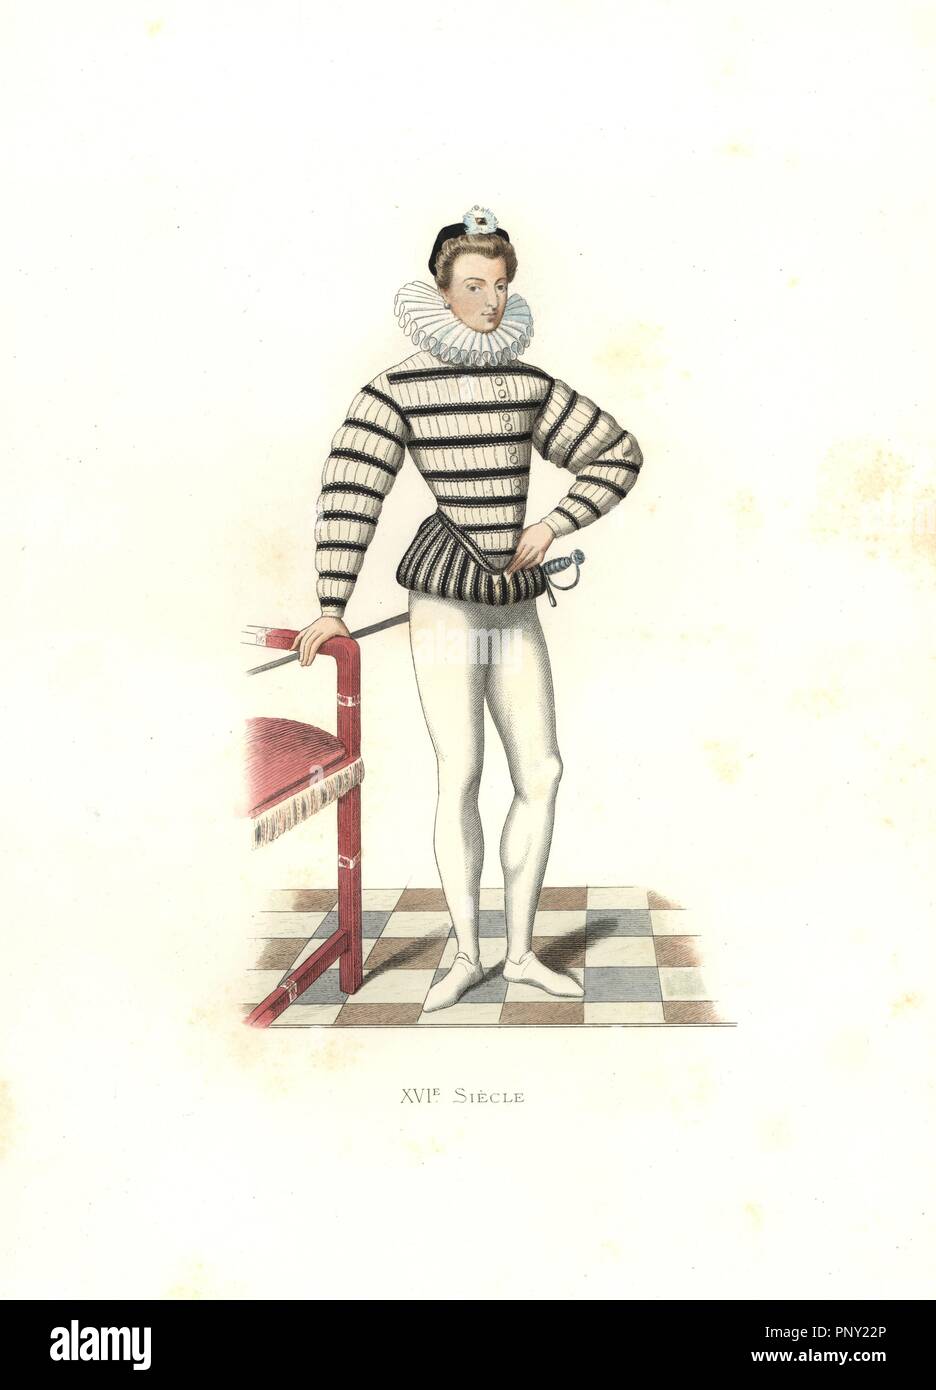 Portrait of Saint-Megrin, France, 16th century, from an illustration by Riffaut. Handcolored illustration by E. Lechevallier-Chevignard, lithographed by A. Didier, L. Flameng, F. Laguillermie, from Georges Duplessis's 'Costumes historiques des XVIe, XVIIe et XVIIIe siecles' (Historical costumes of the 16th, 17th and 18th centuries), Paris 1867. The book was a continuation of the series on the costumes of the 12th to 15th centuries published by Camille Bonnard and Paul Mercuri from 1830. Georges Duplessis (1834-1899) was curator of the Prints department at the Bibliotheque nationale. Edmond Lec Stock Photo